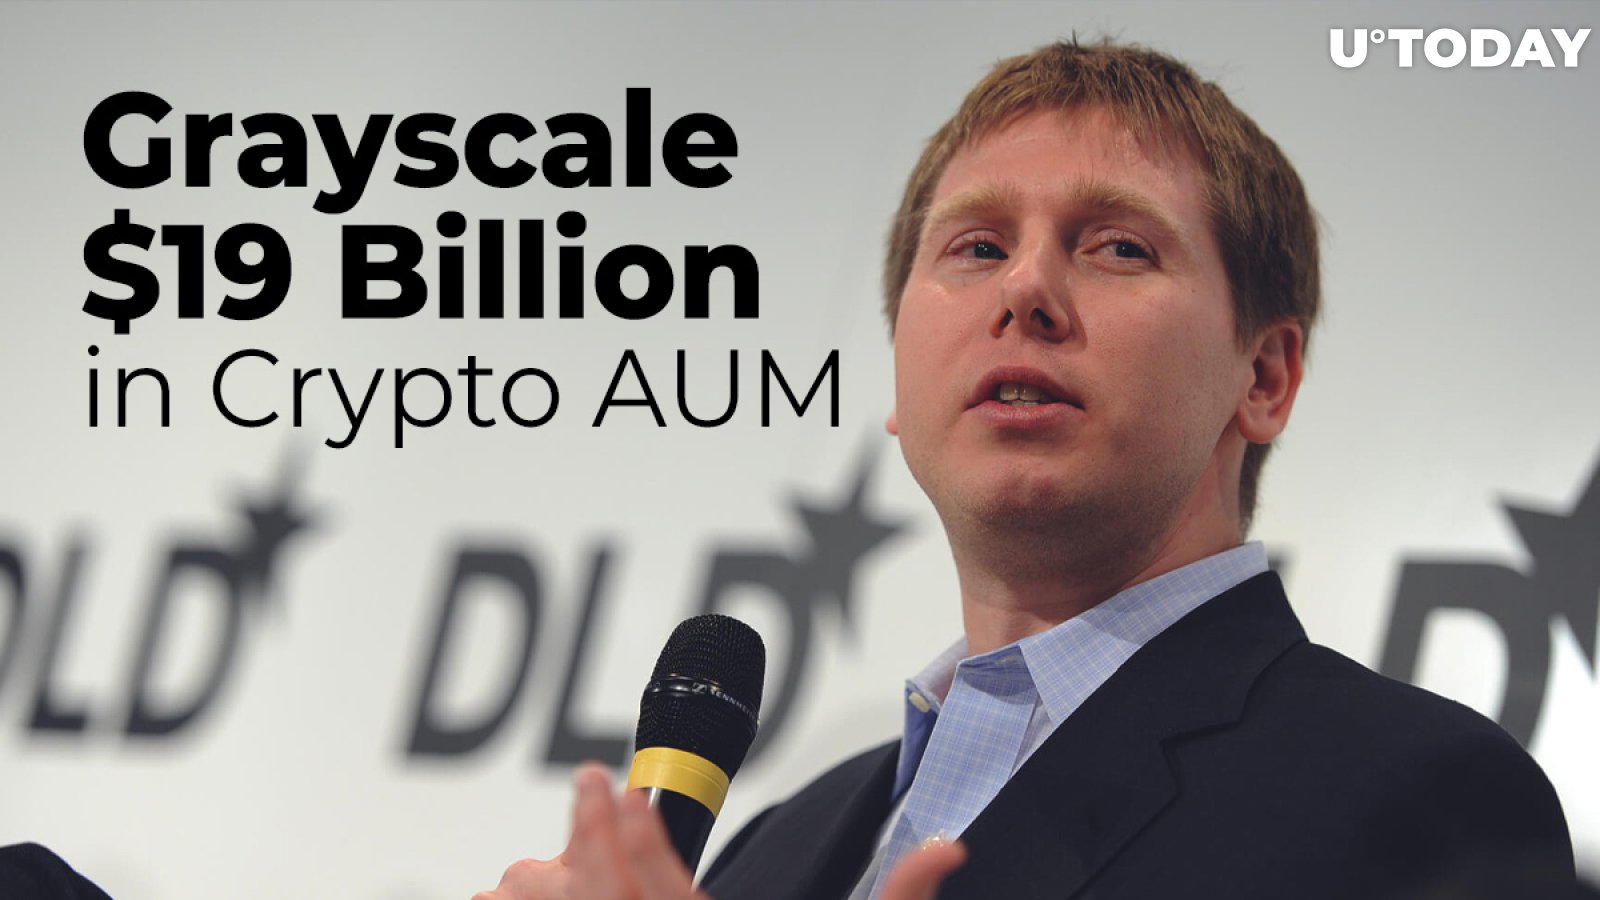 Grayscale Now Holds $19 Billion in Crypto AUM, Barry Silbert Tweets